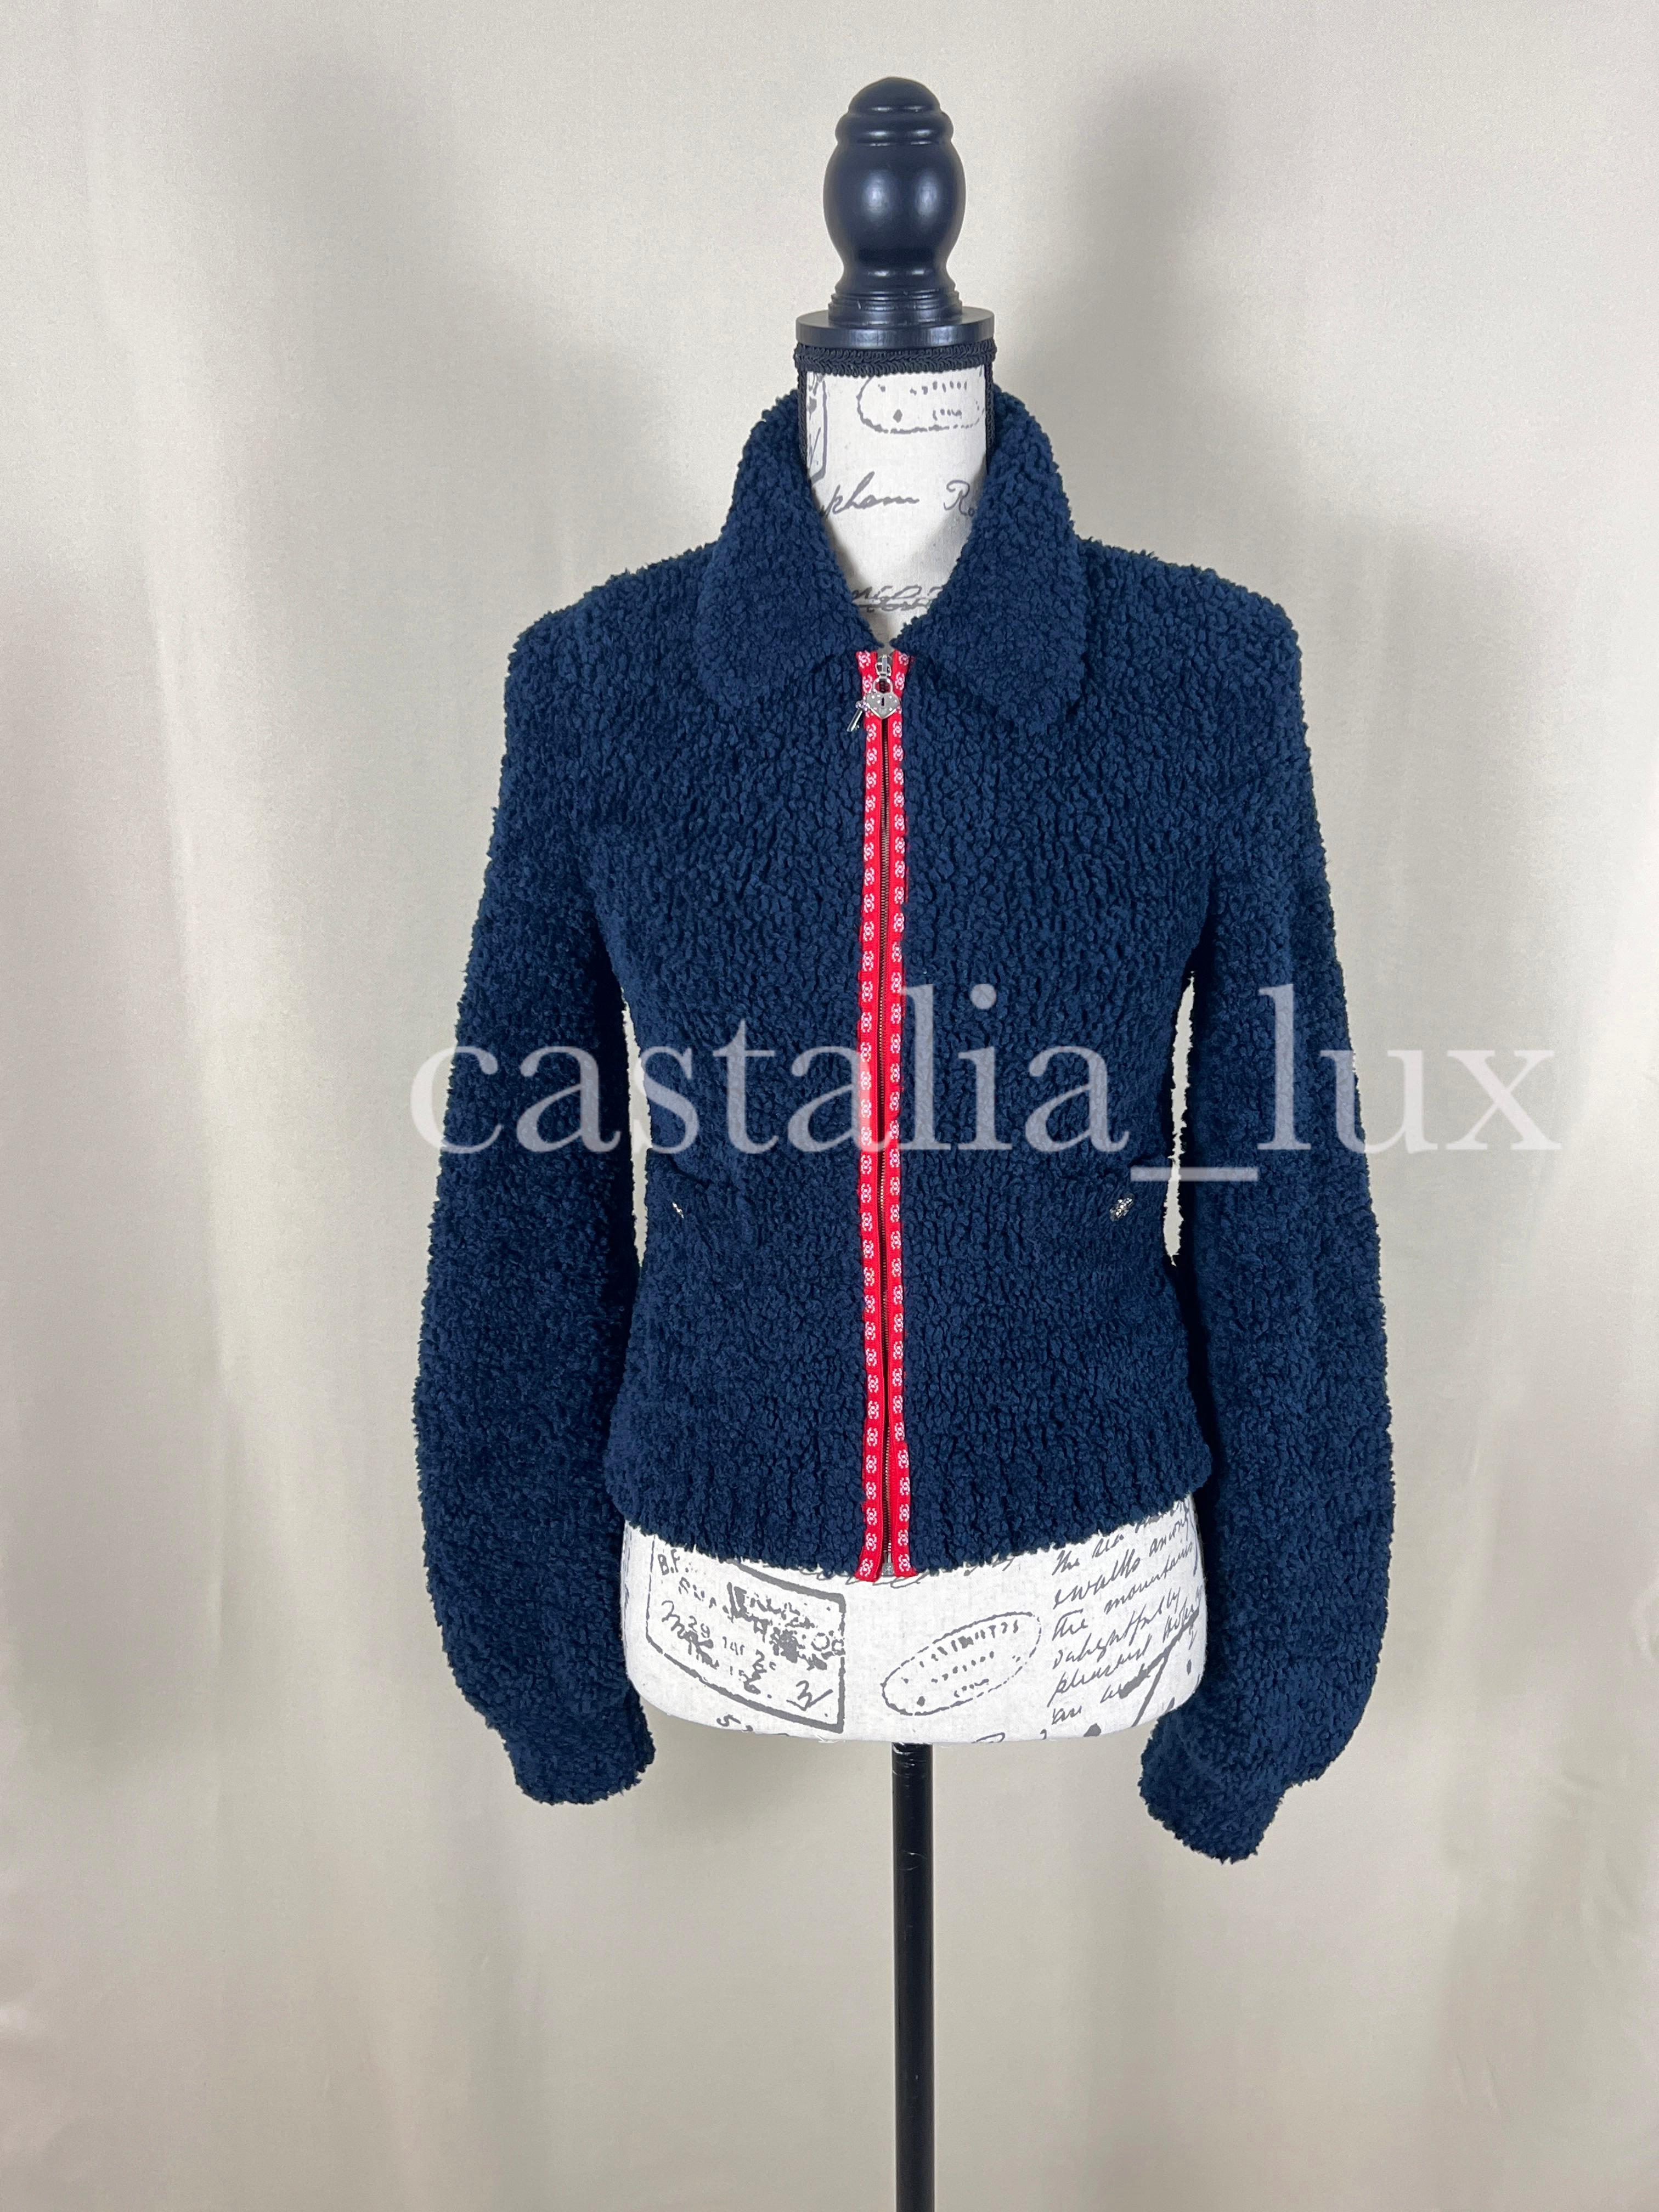 Chanel New Iconic CC Logo Teddy Jacket / Bomber For Sale 11